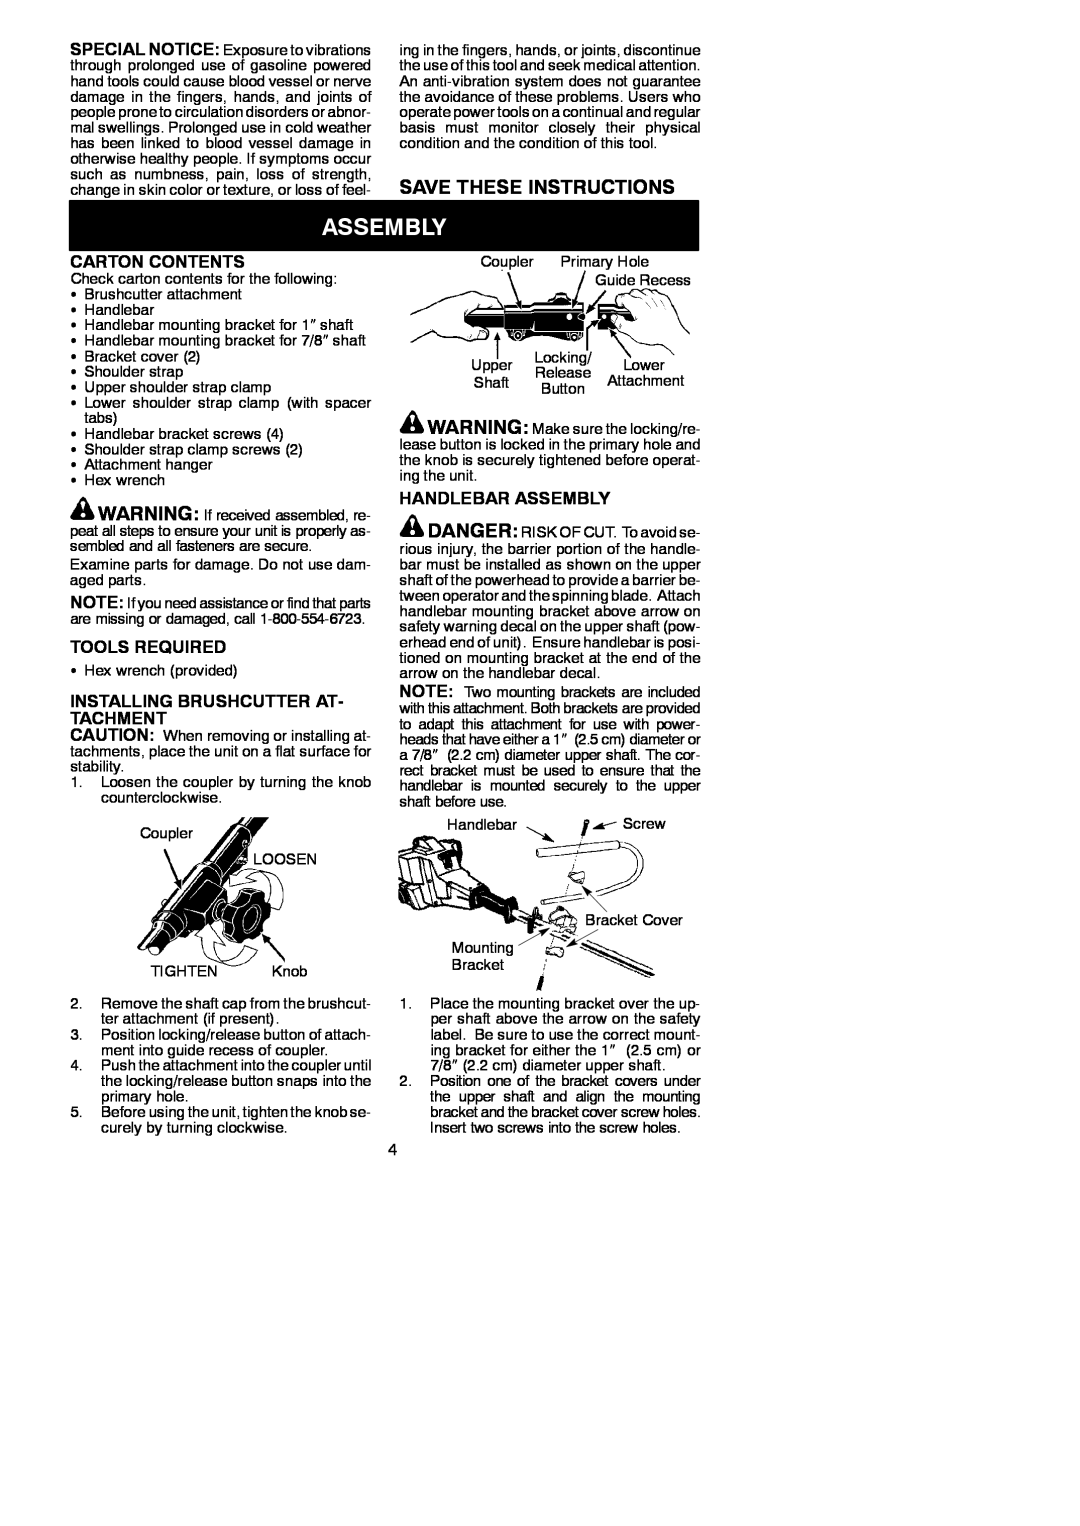 Weed Eater 530164835 instruction manual Save These Instructions, Carton Contents, Tools Required, Handlebar Assembly 